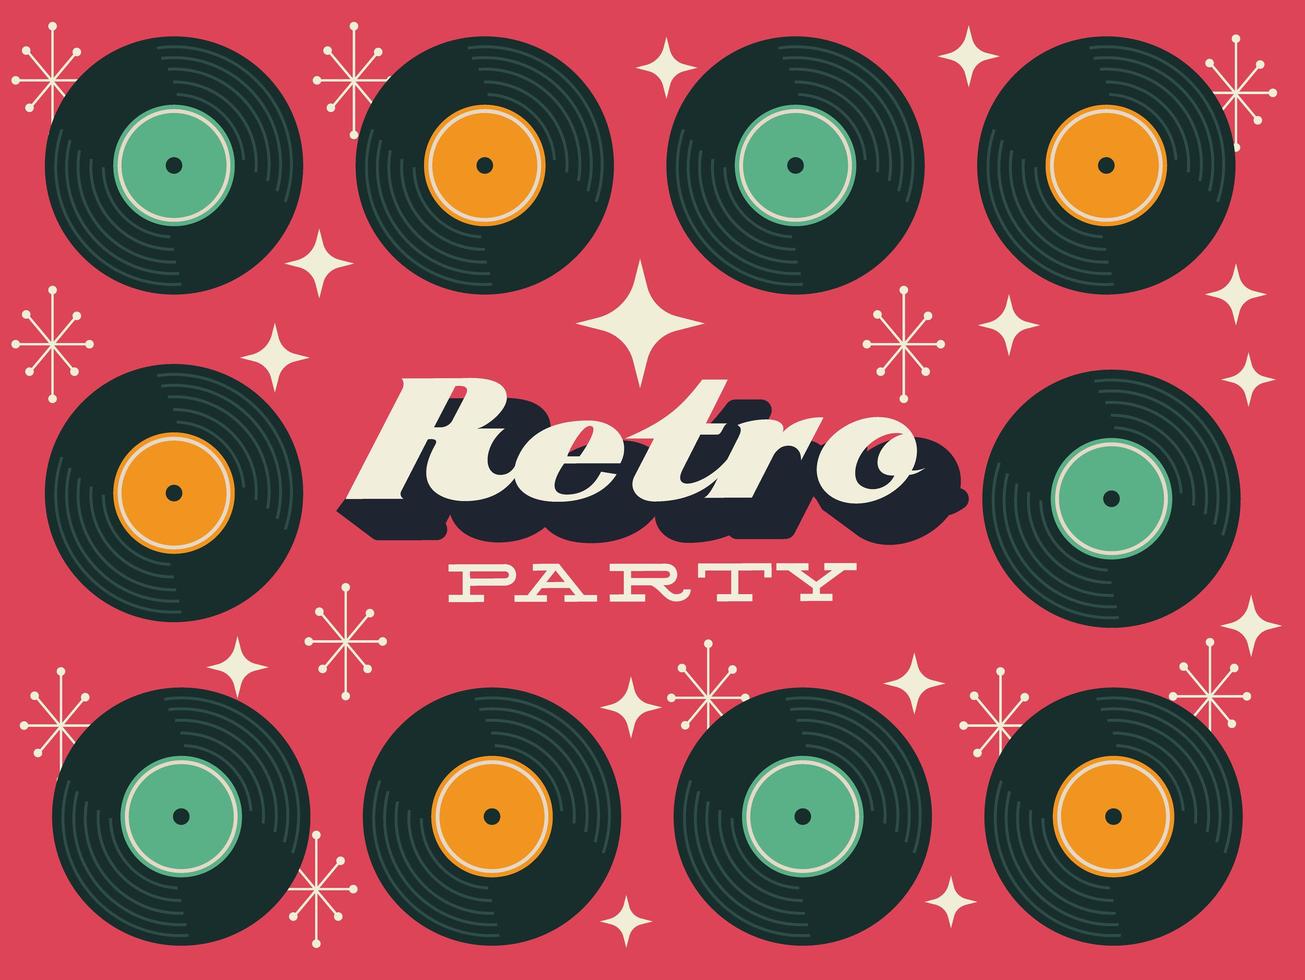 Retro style party poster with vinyl records vector